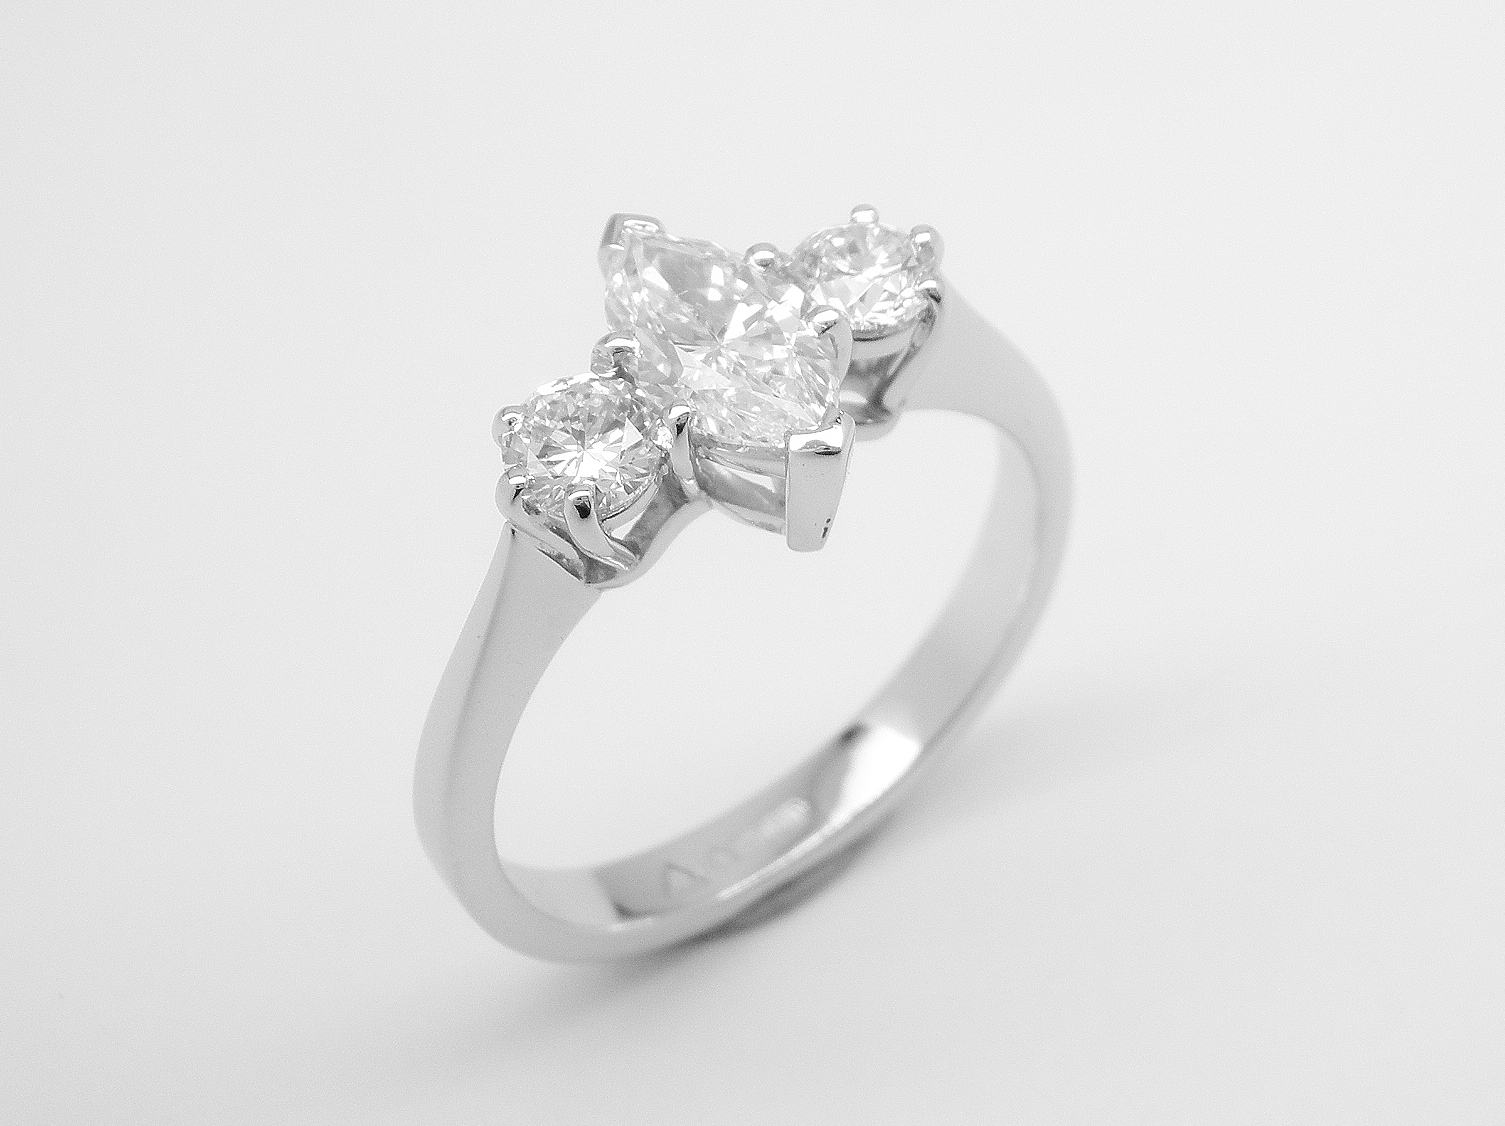 A 3 stone marquise cut and round brilliant cut diamond ring mounted in platinum.